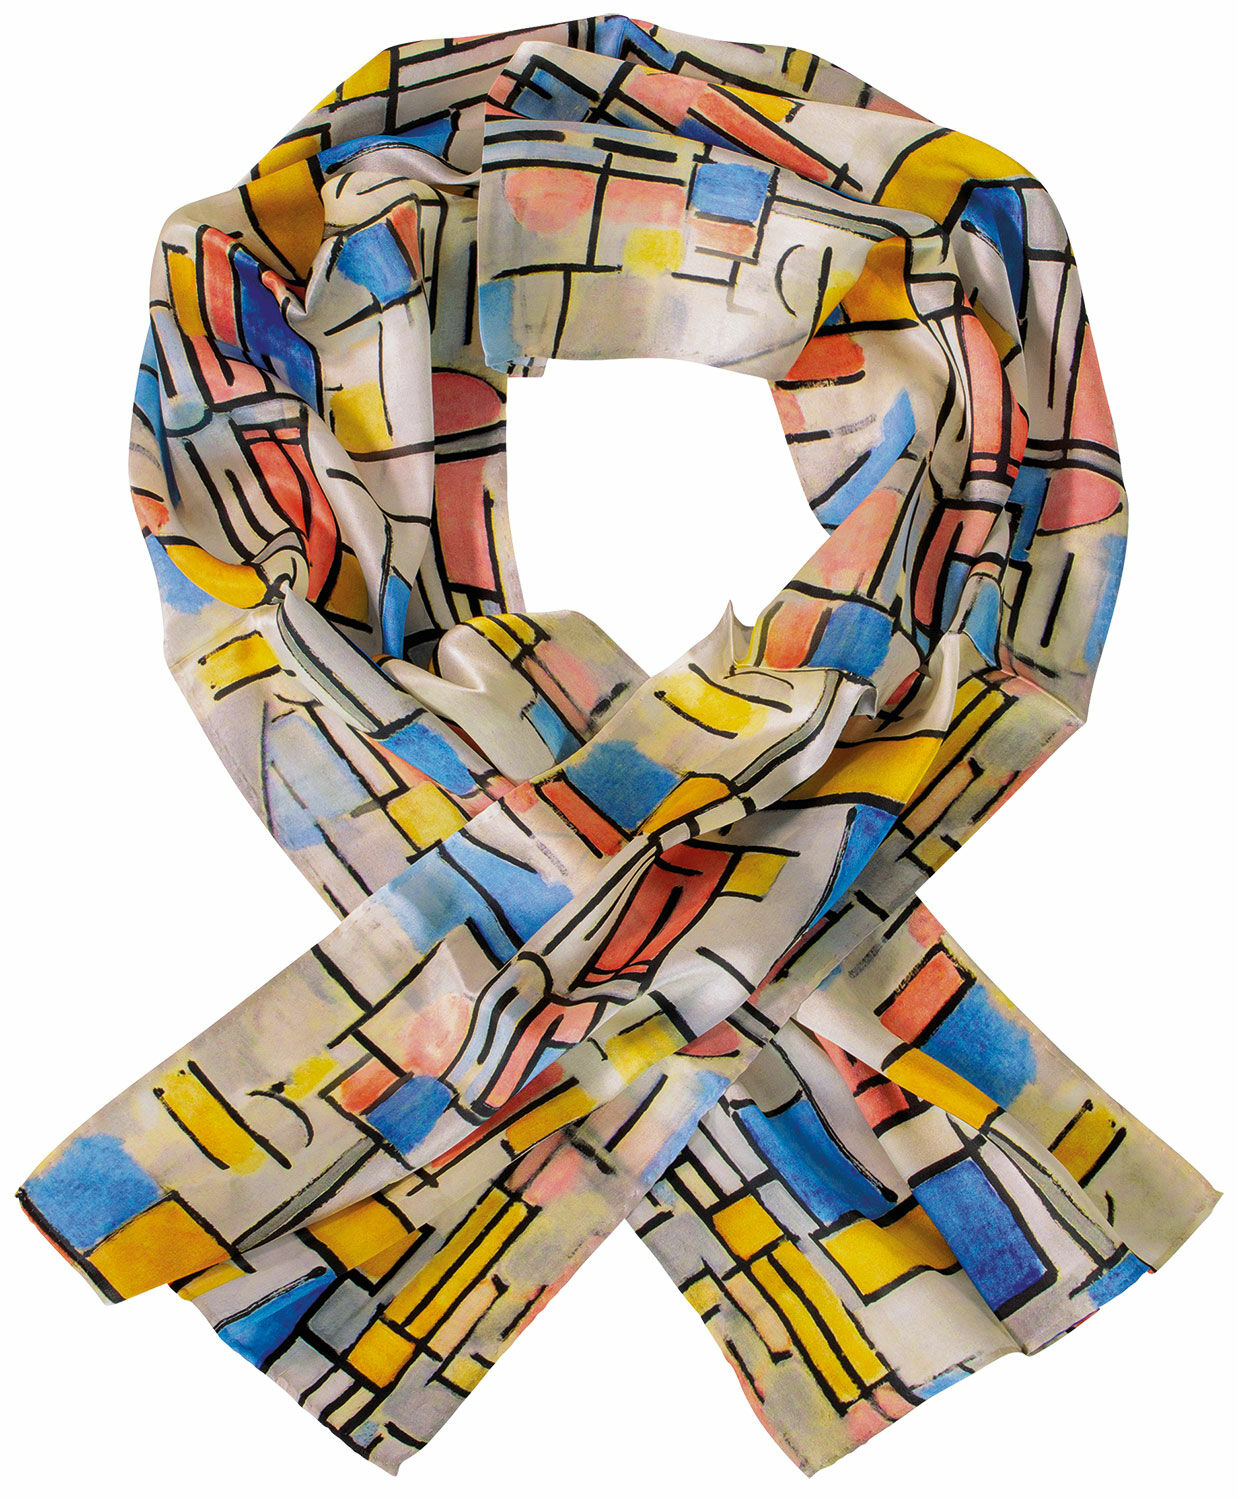 Silk scarf "Composition in Oval with Color Planes 1" by Piet Mondrian